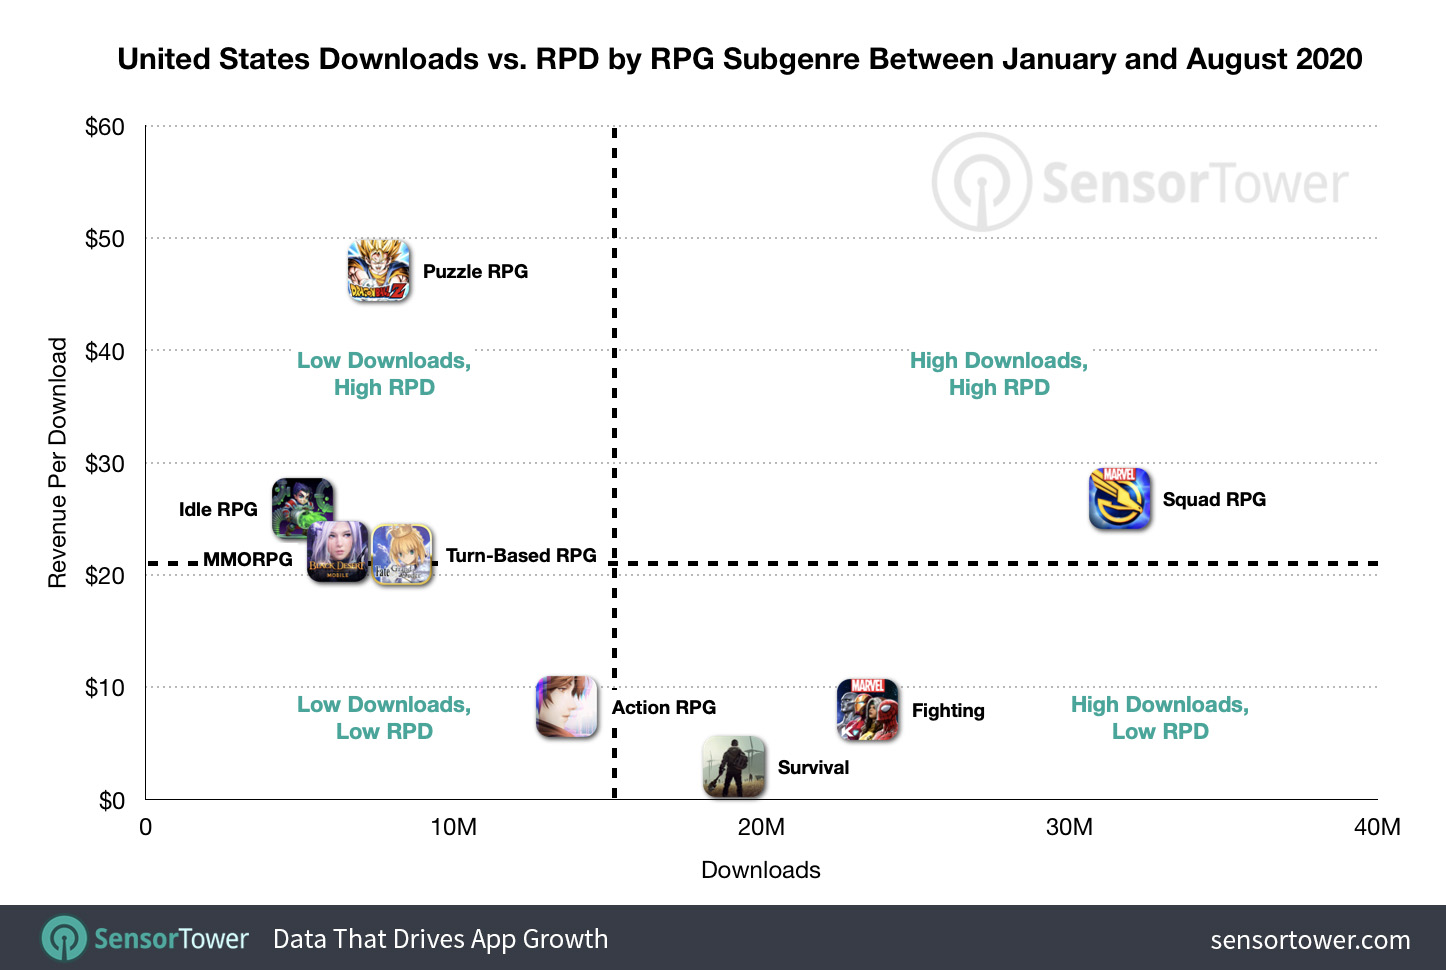 United States Downloads vs. RPD by RPG Subgenre Between Jan. 1 and Aug. 30, 2020